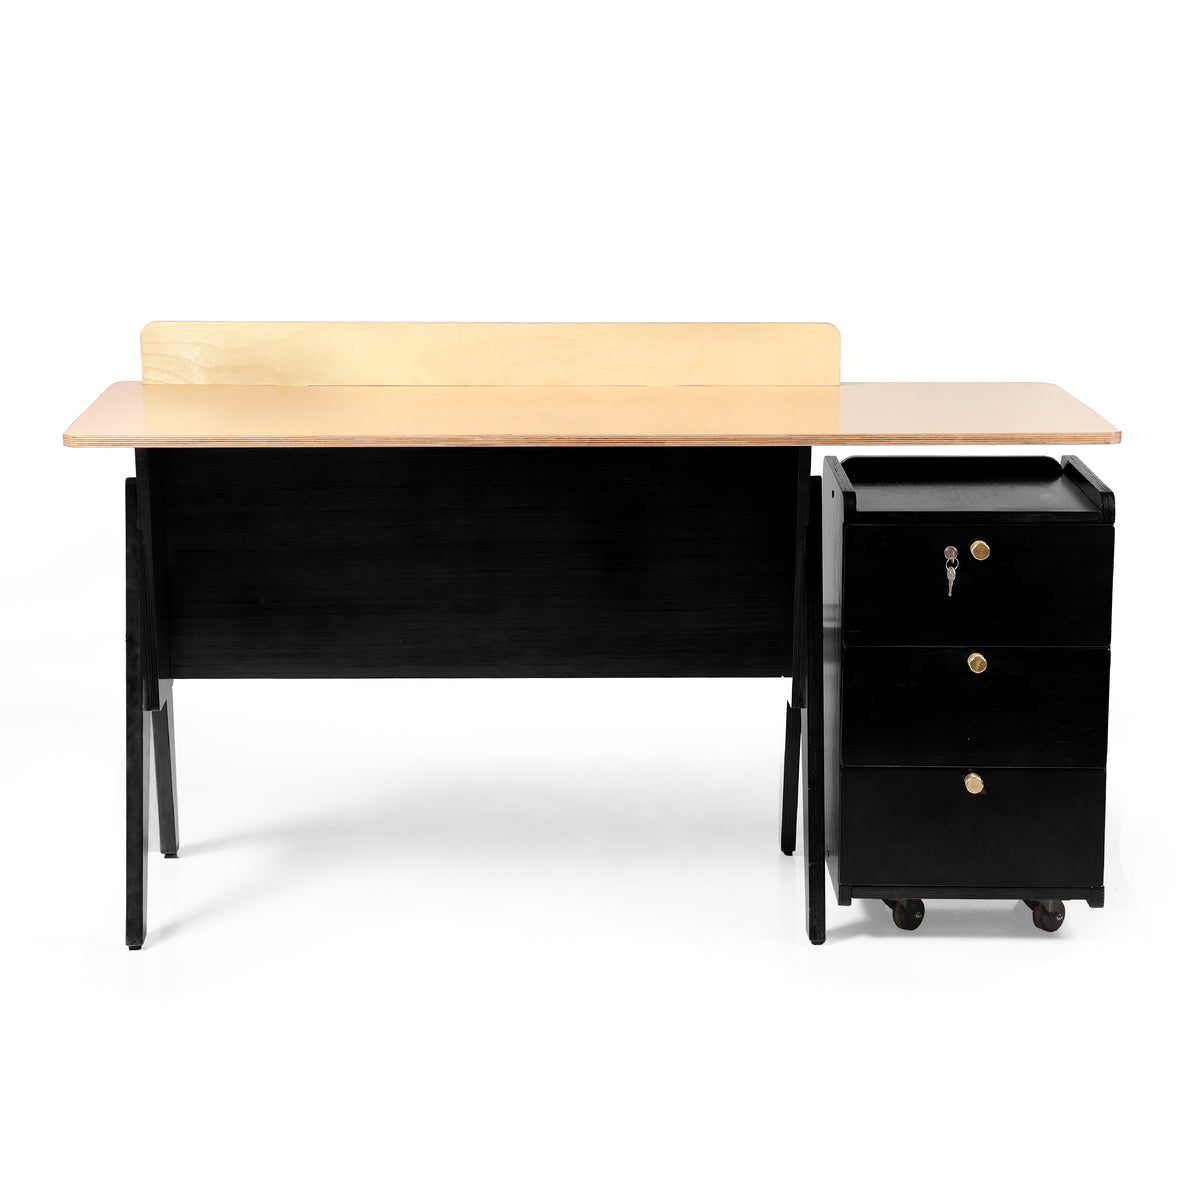 Resu - Work Table With Movable Pedestal